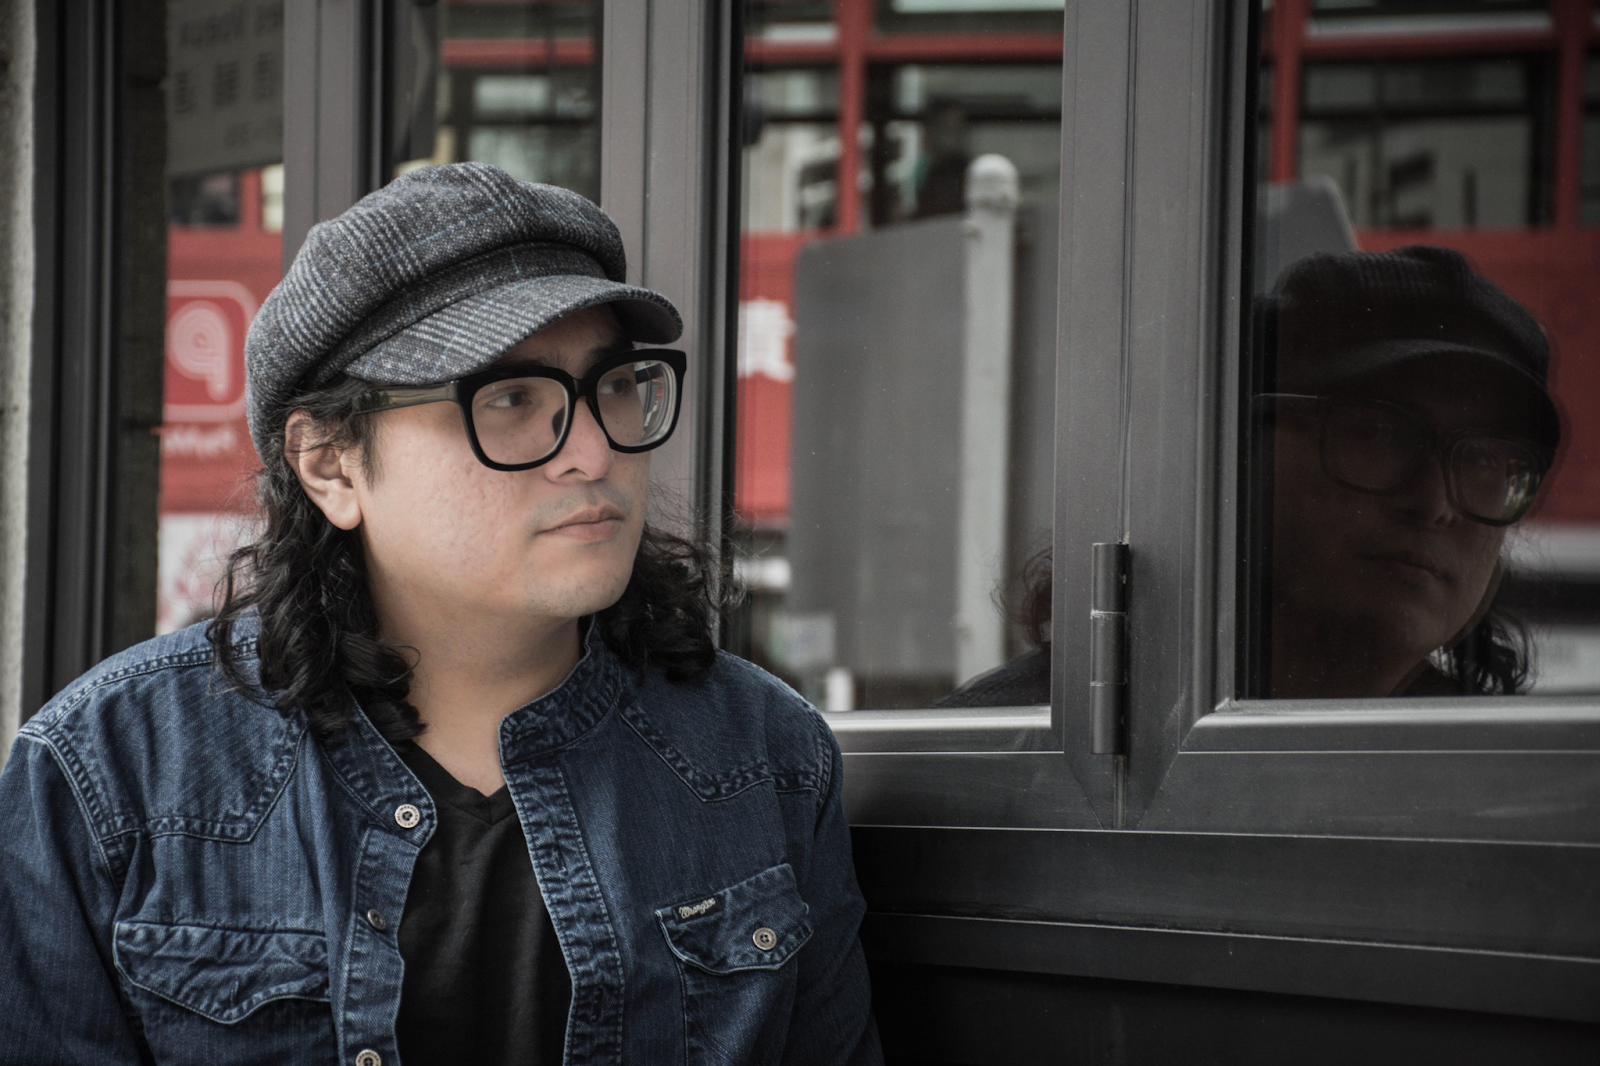 Filipino singer-songwriter releases debut single under O/C Records